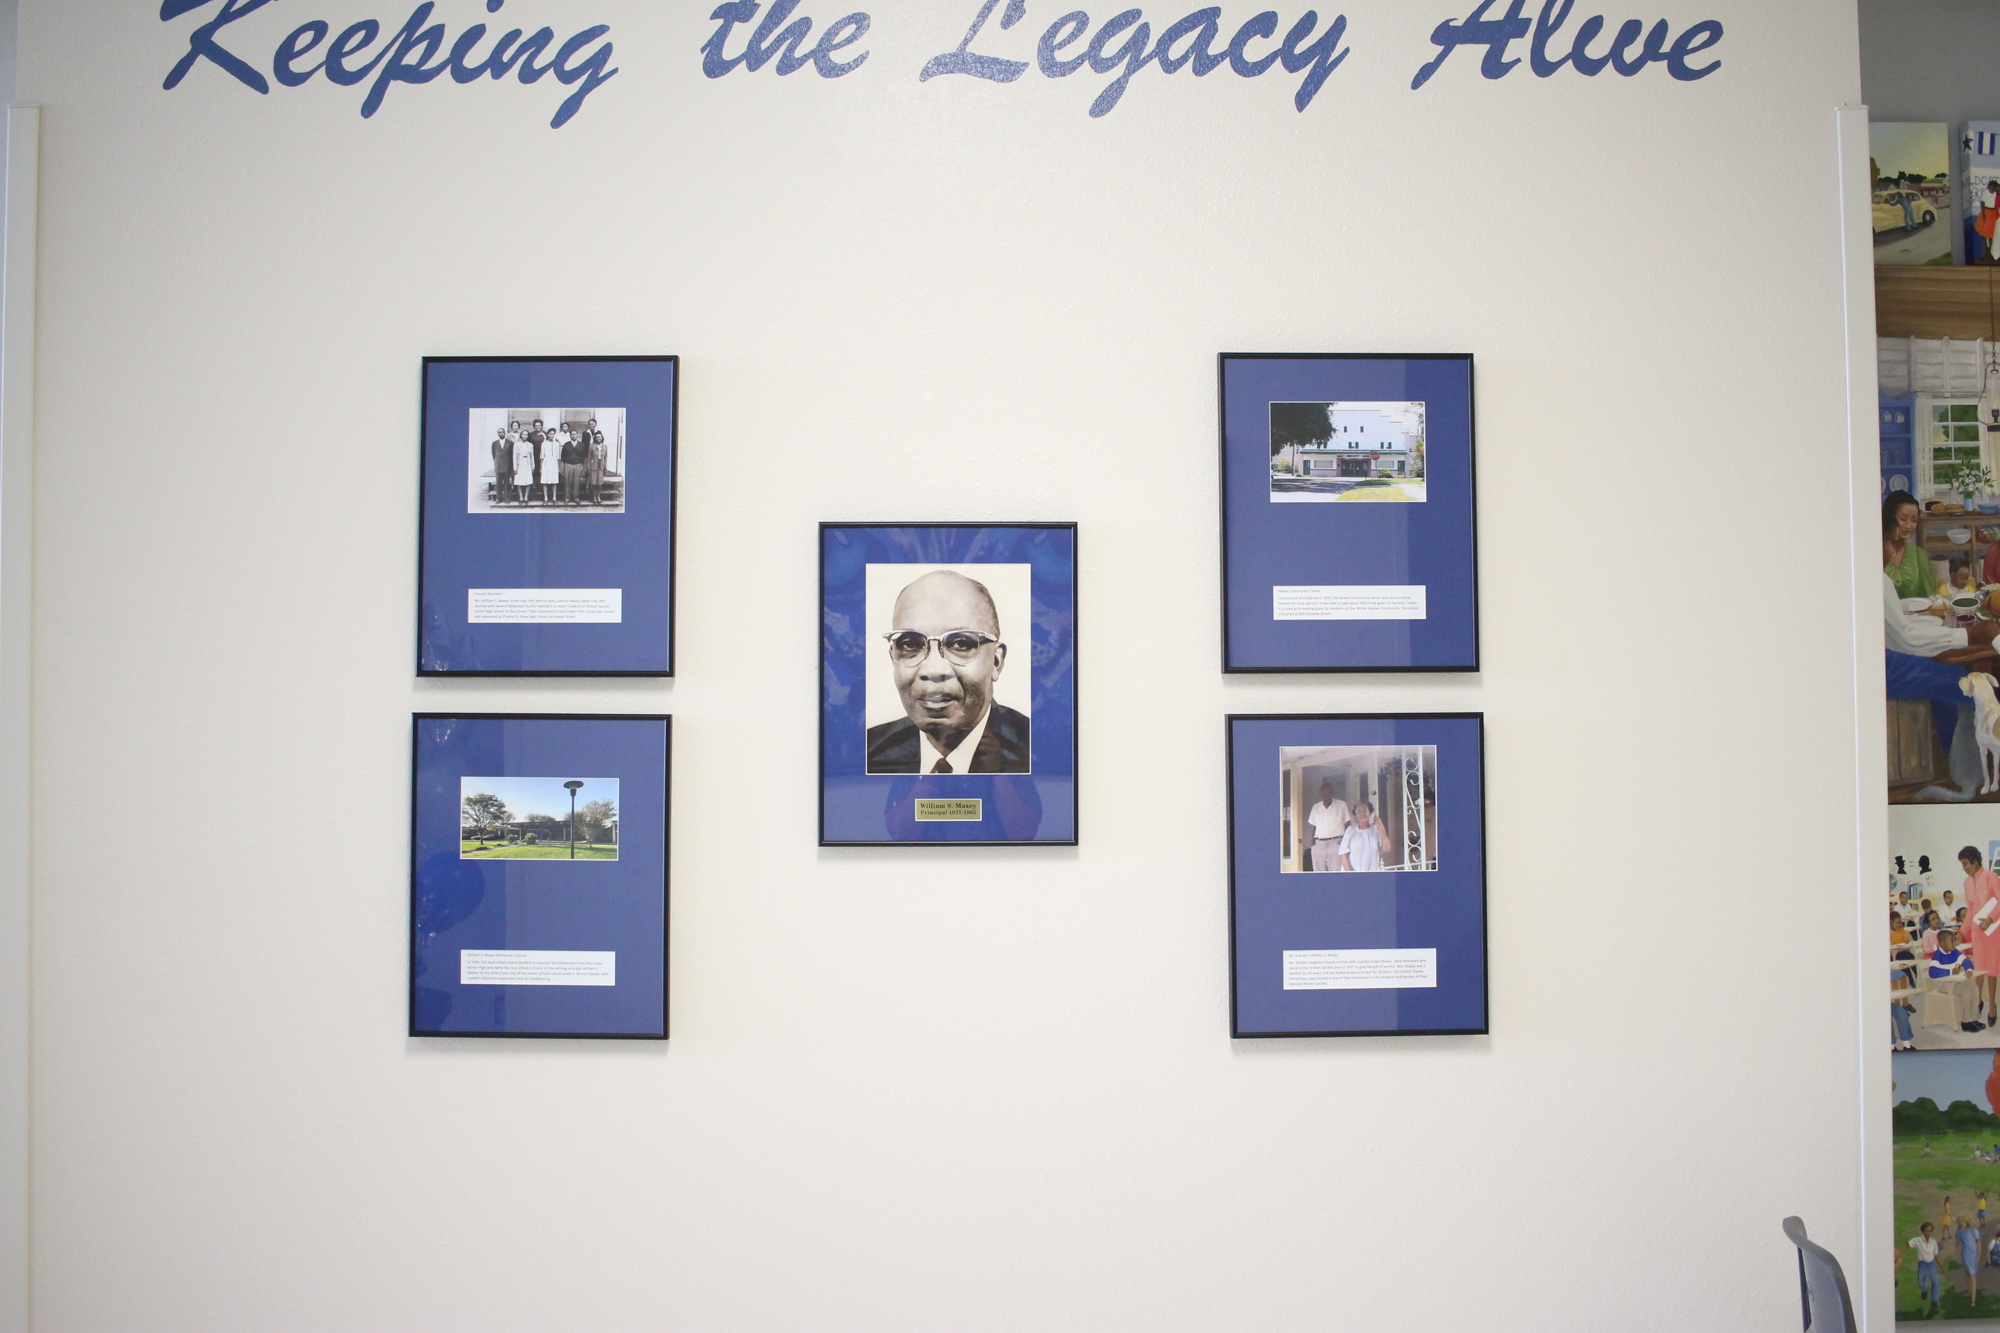 A collection of old photographs pay homage to the legacy of William S. Maxey Elementary School.